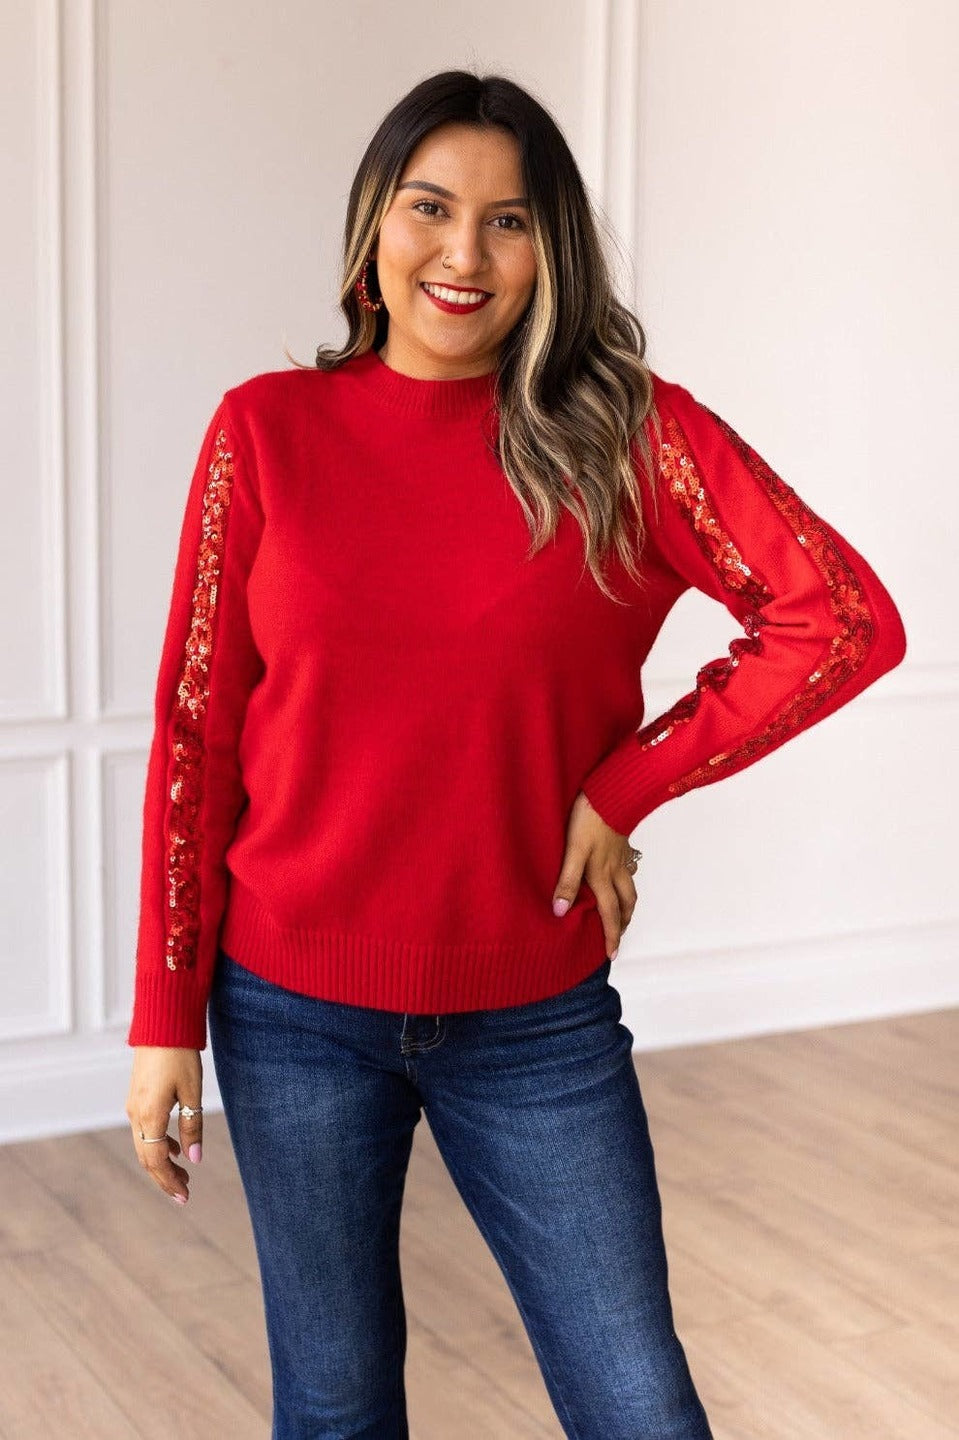 Southern Grace - Garnet Glam Sequined Sweater